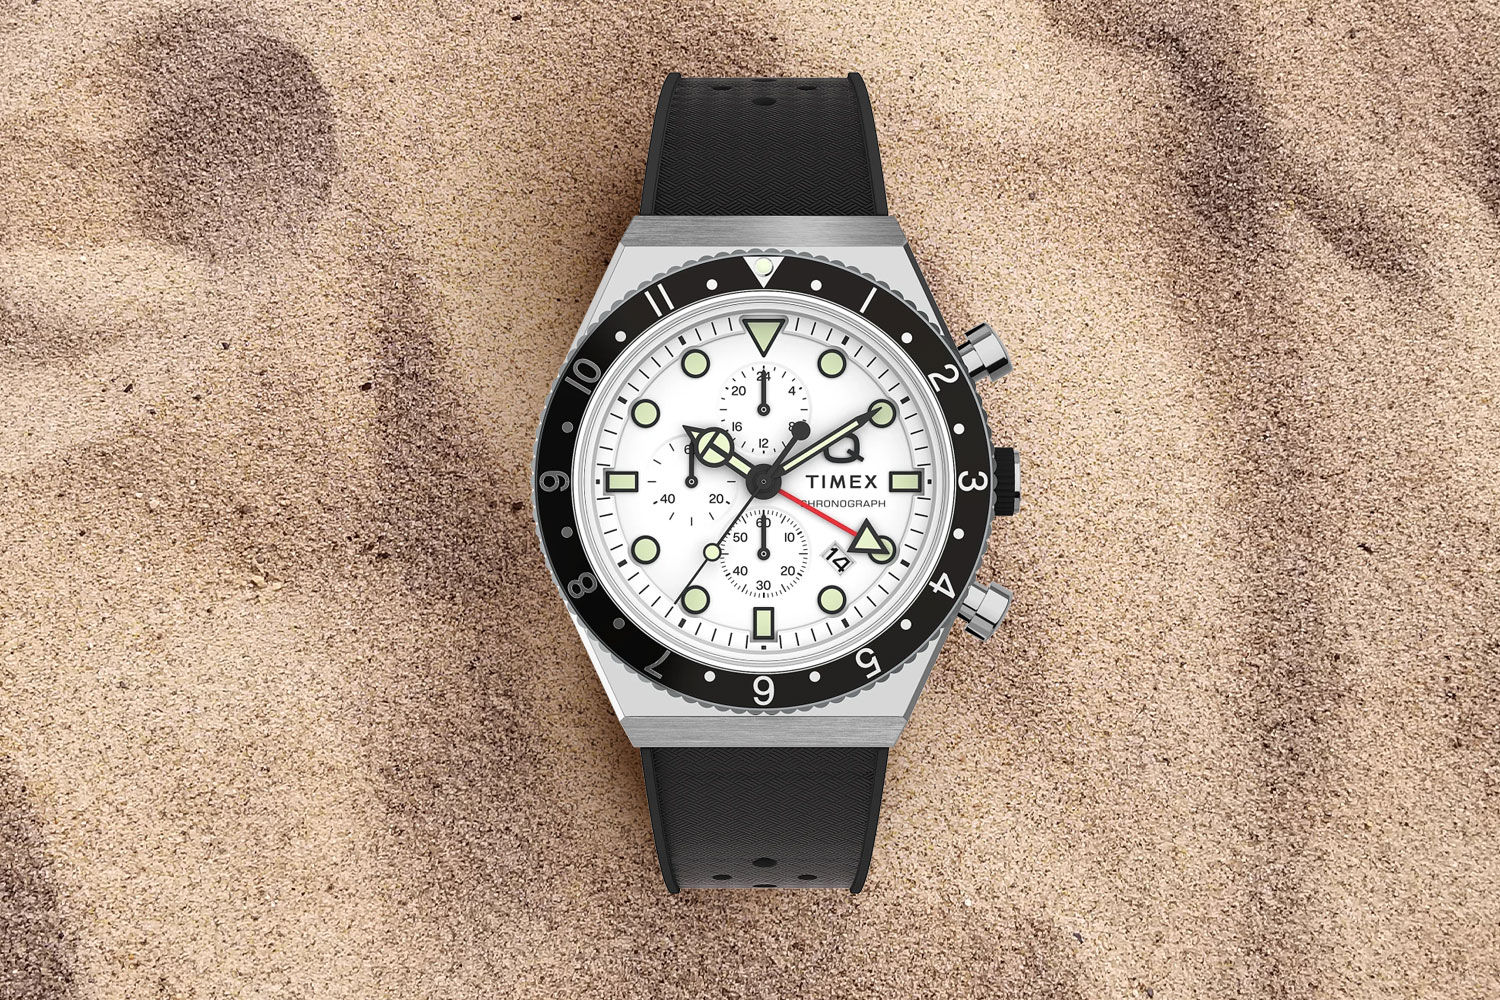 watch on the sand.